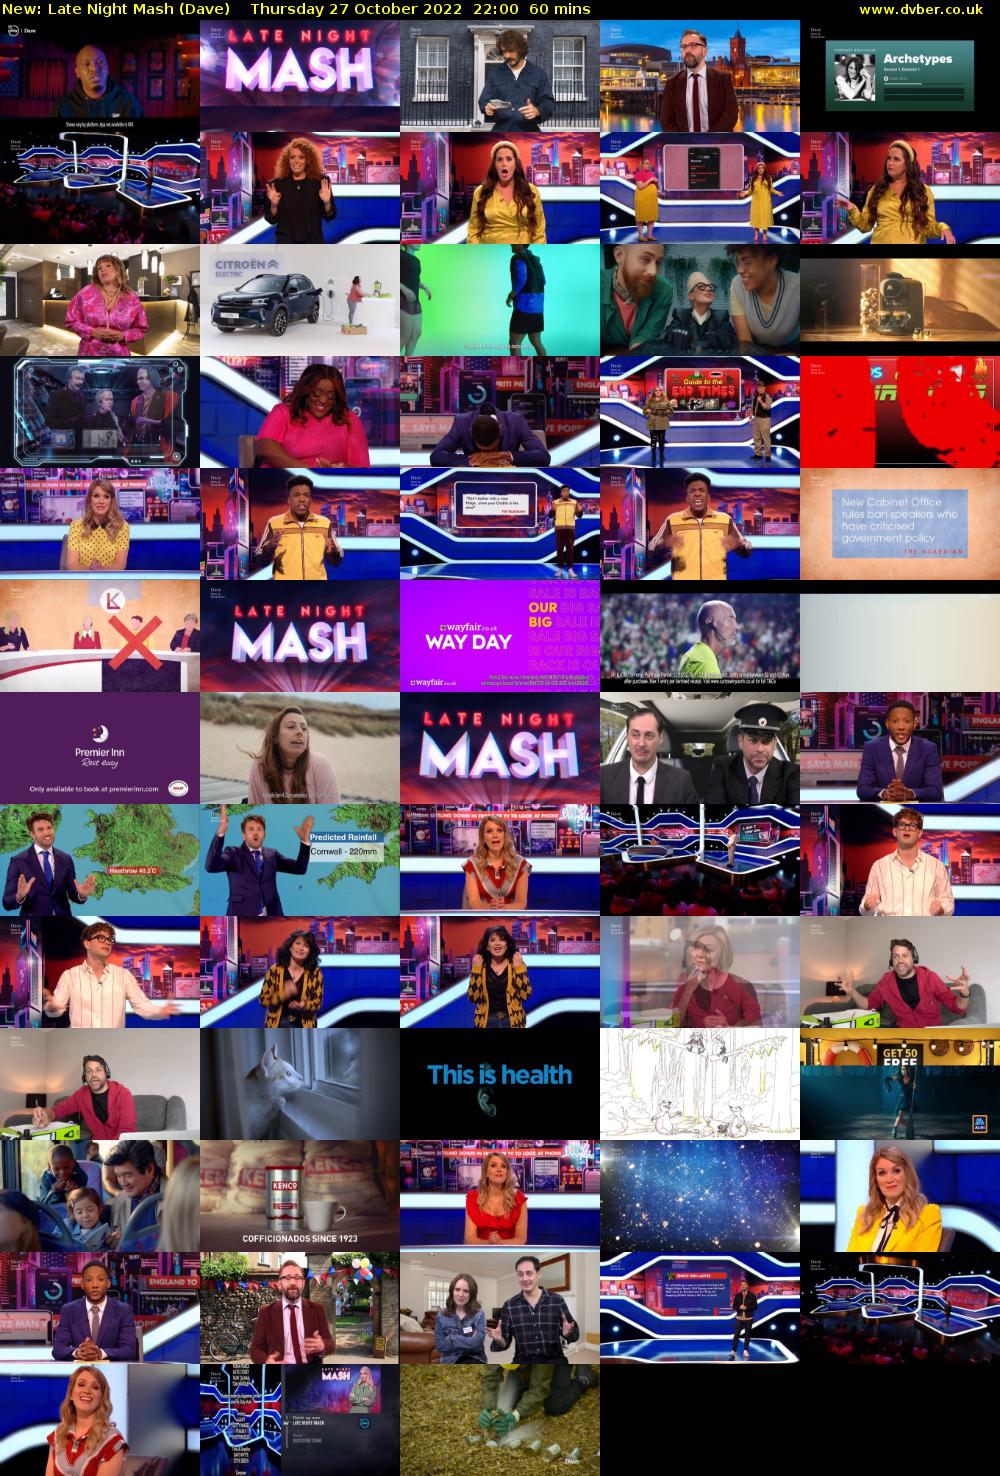 Late Night Mash (Dave) Thursday 27 October 2022 22:00 - 23:00